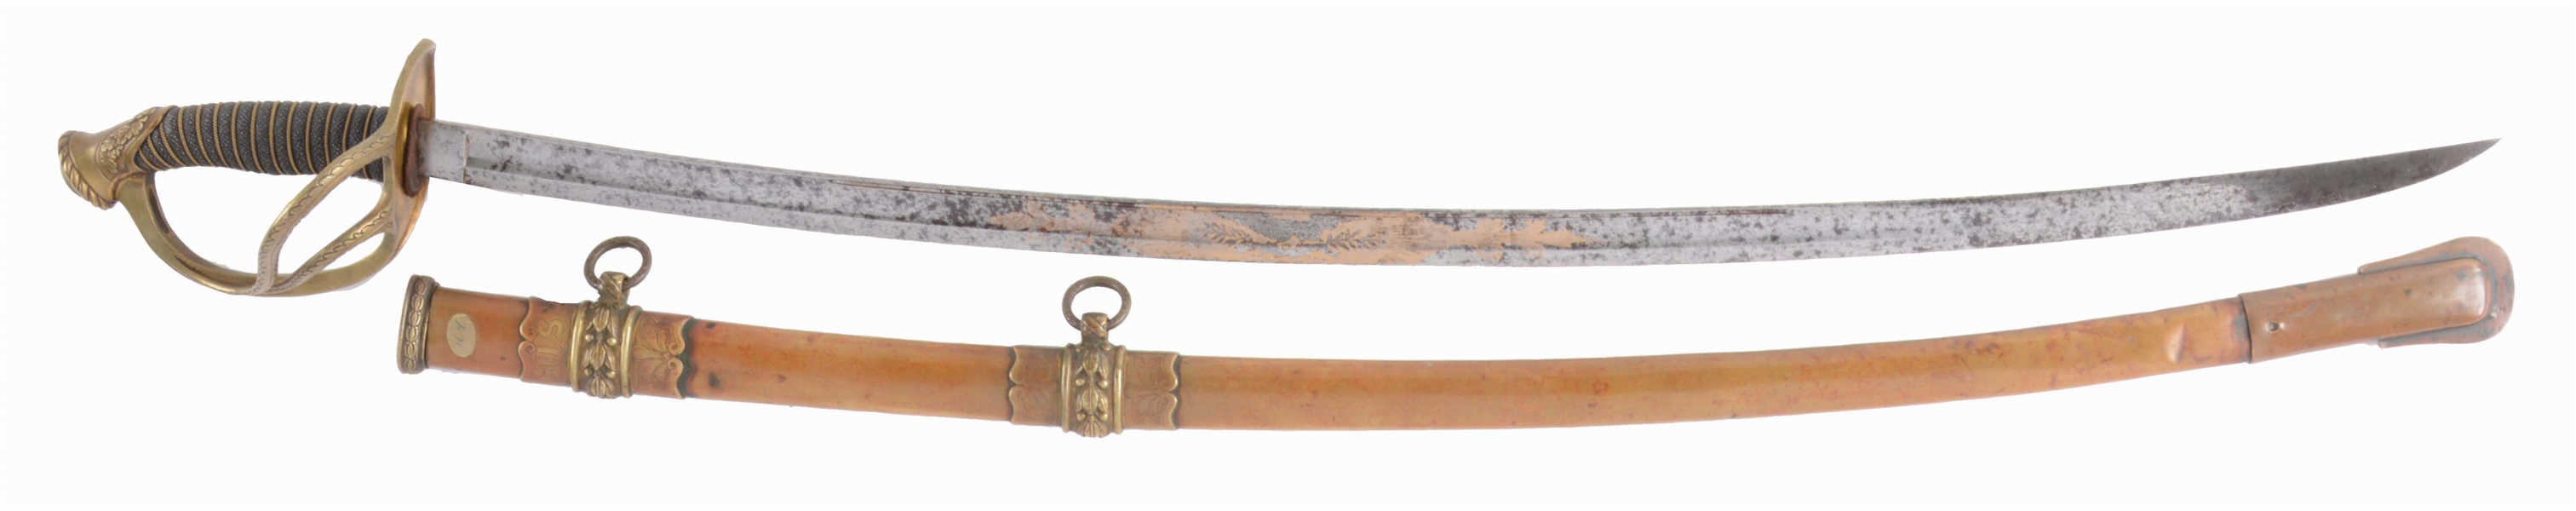 RARE AND DESIRABLE 1860 OFFICERS PRESENTATION SABER BY TIFFANY AND COLINS PRESENTED TO CAPTAIN THOMAS MCCARTY BY THE MEMBERS OF TROOP COMPANY C 70TH REGIMENT NEW YORK STATE MILITIA, OCTOBER 1863. 